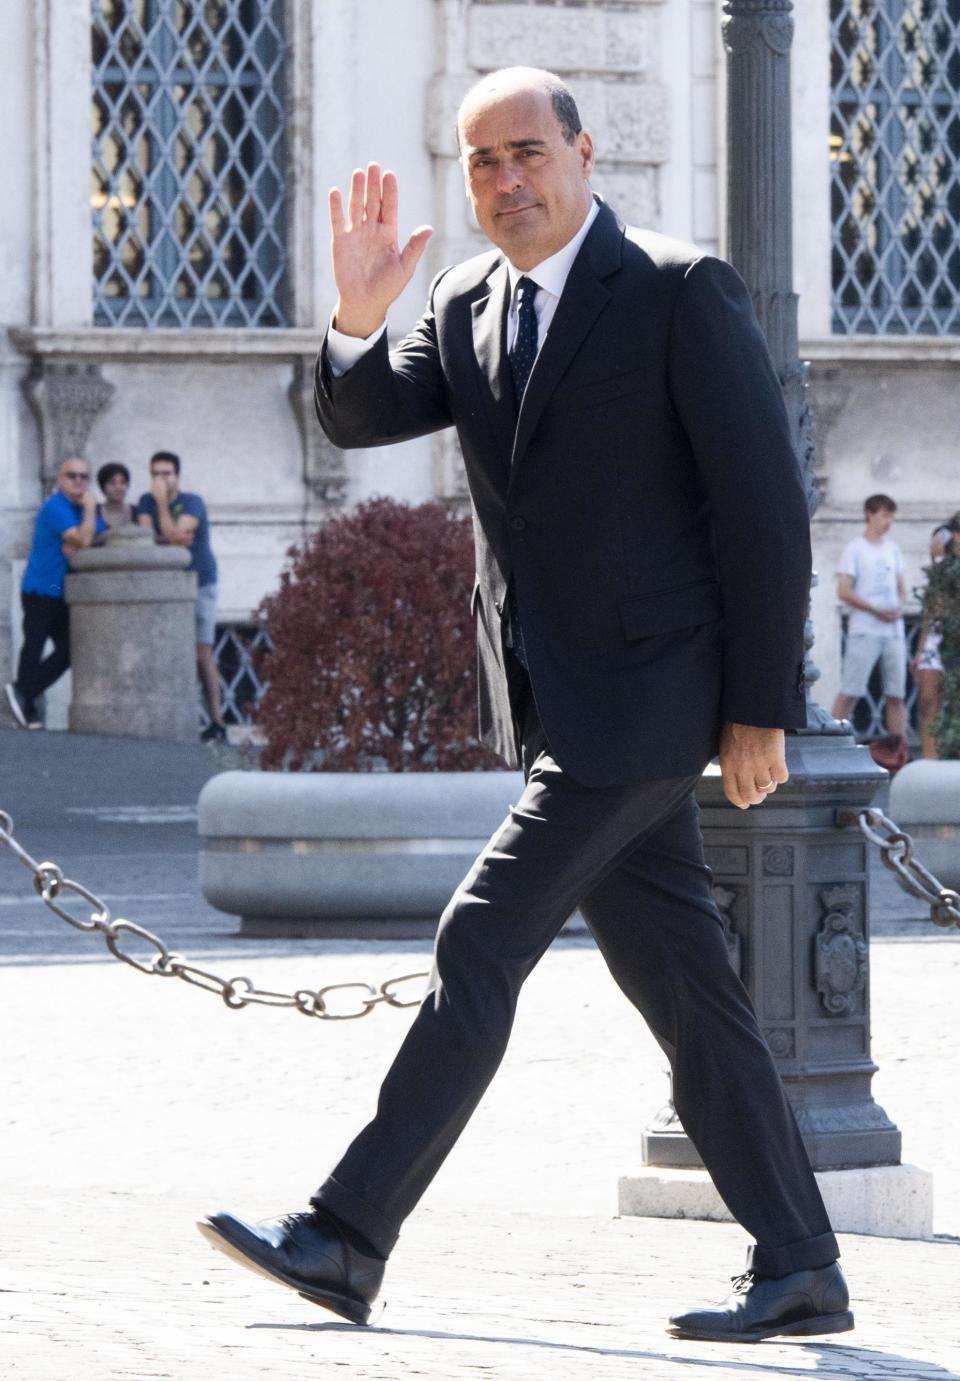 Democratic Party leader Nicola Zingaretti arrives at Quirinale palace for a meeting with Italian President Sergio Mattarella, in Rome, Thursday, Aug. 22, 2019. President Sergio Mattarella continued receiving political leaders Thursday, to explore if a solid majority with staying power exists in Parliament for a new government that could win the required confidence vote. (Claudio Peri/ANSA via AP)